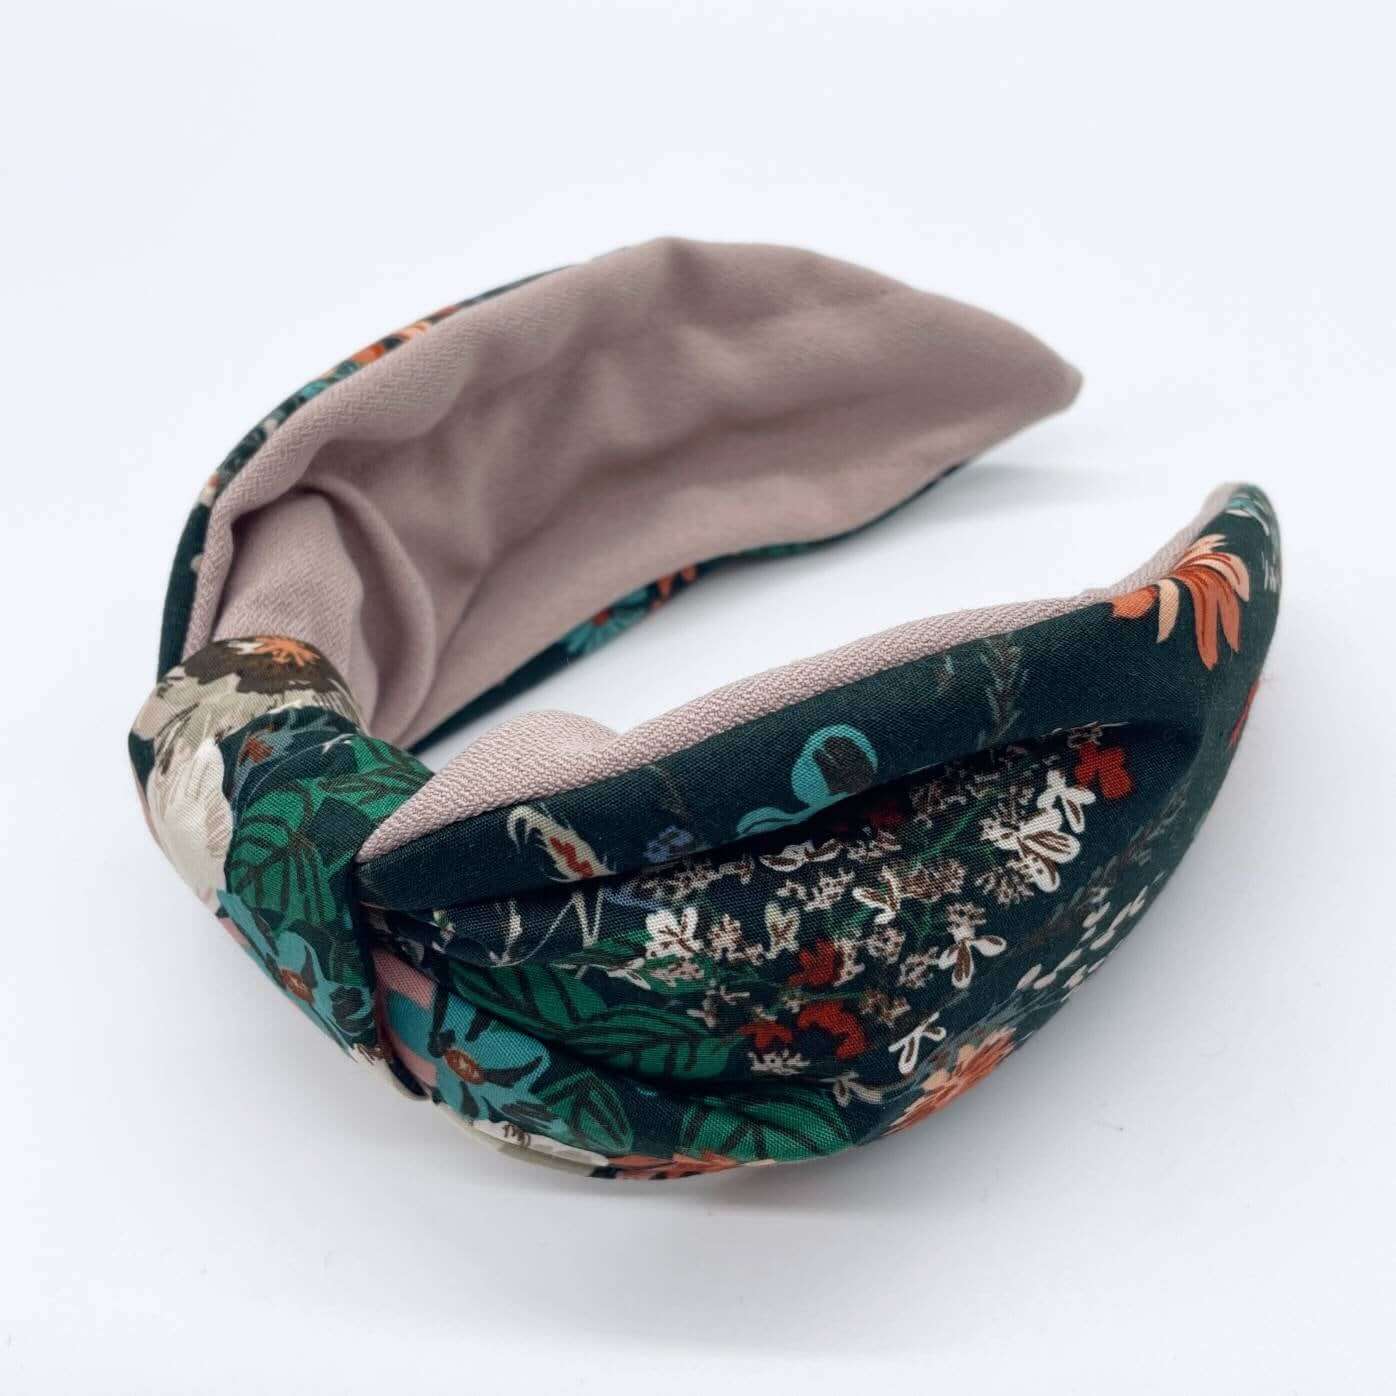 A bow-style, knot headband made from dark green fabric with orange and pink flowers and a soft pink lining underneath.